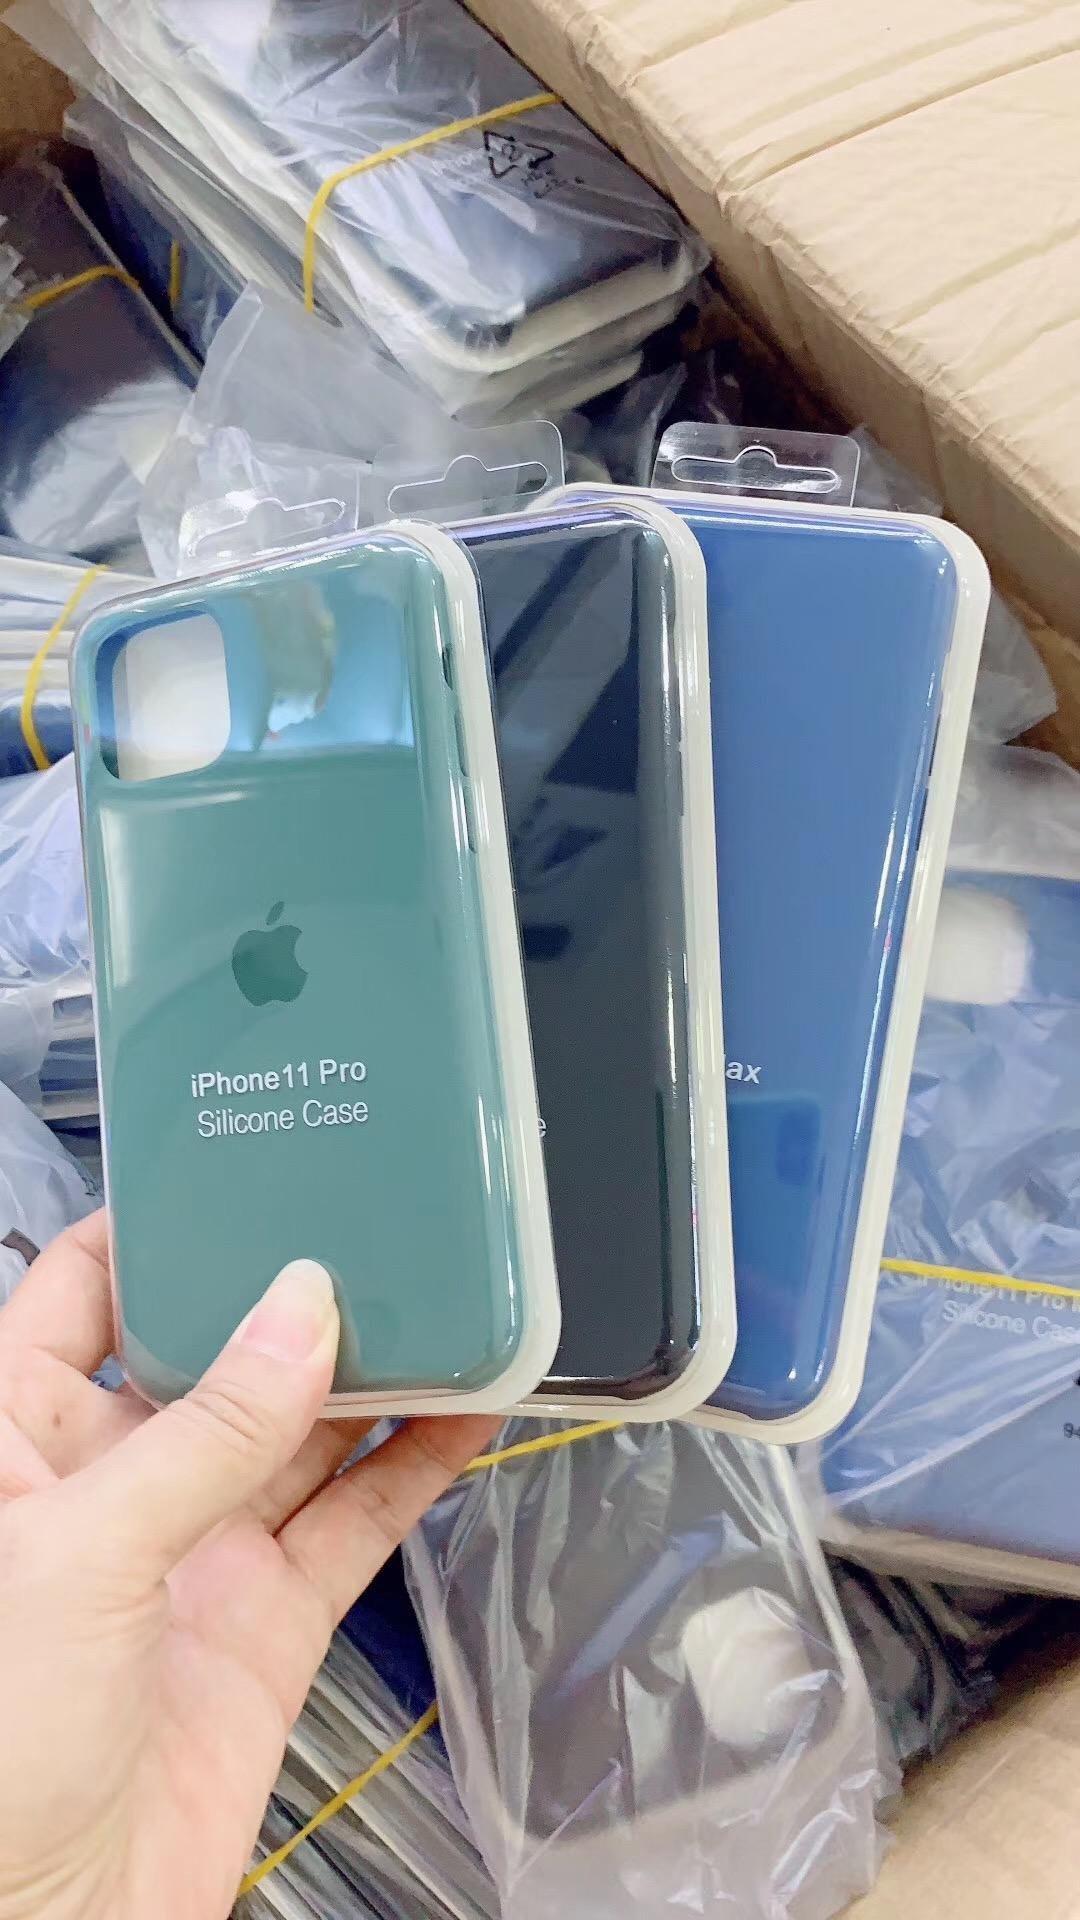 Wholesale Apple official website silicone case for iphone 11 pro max xs max 7 8p 3